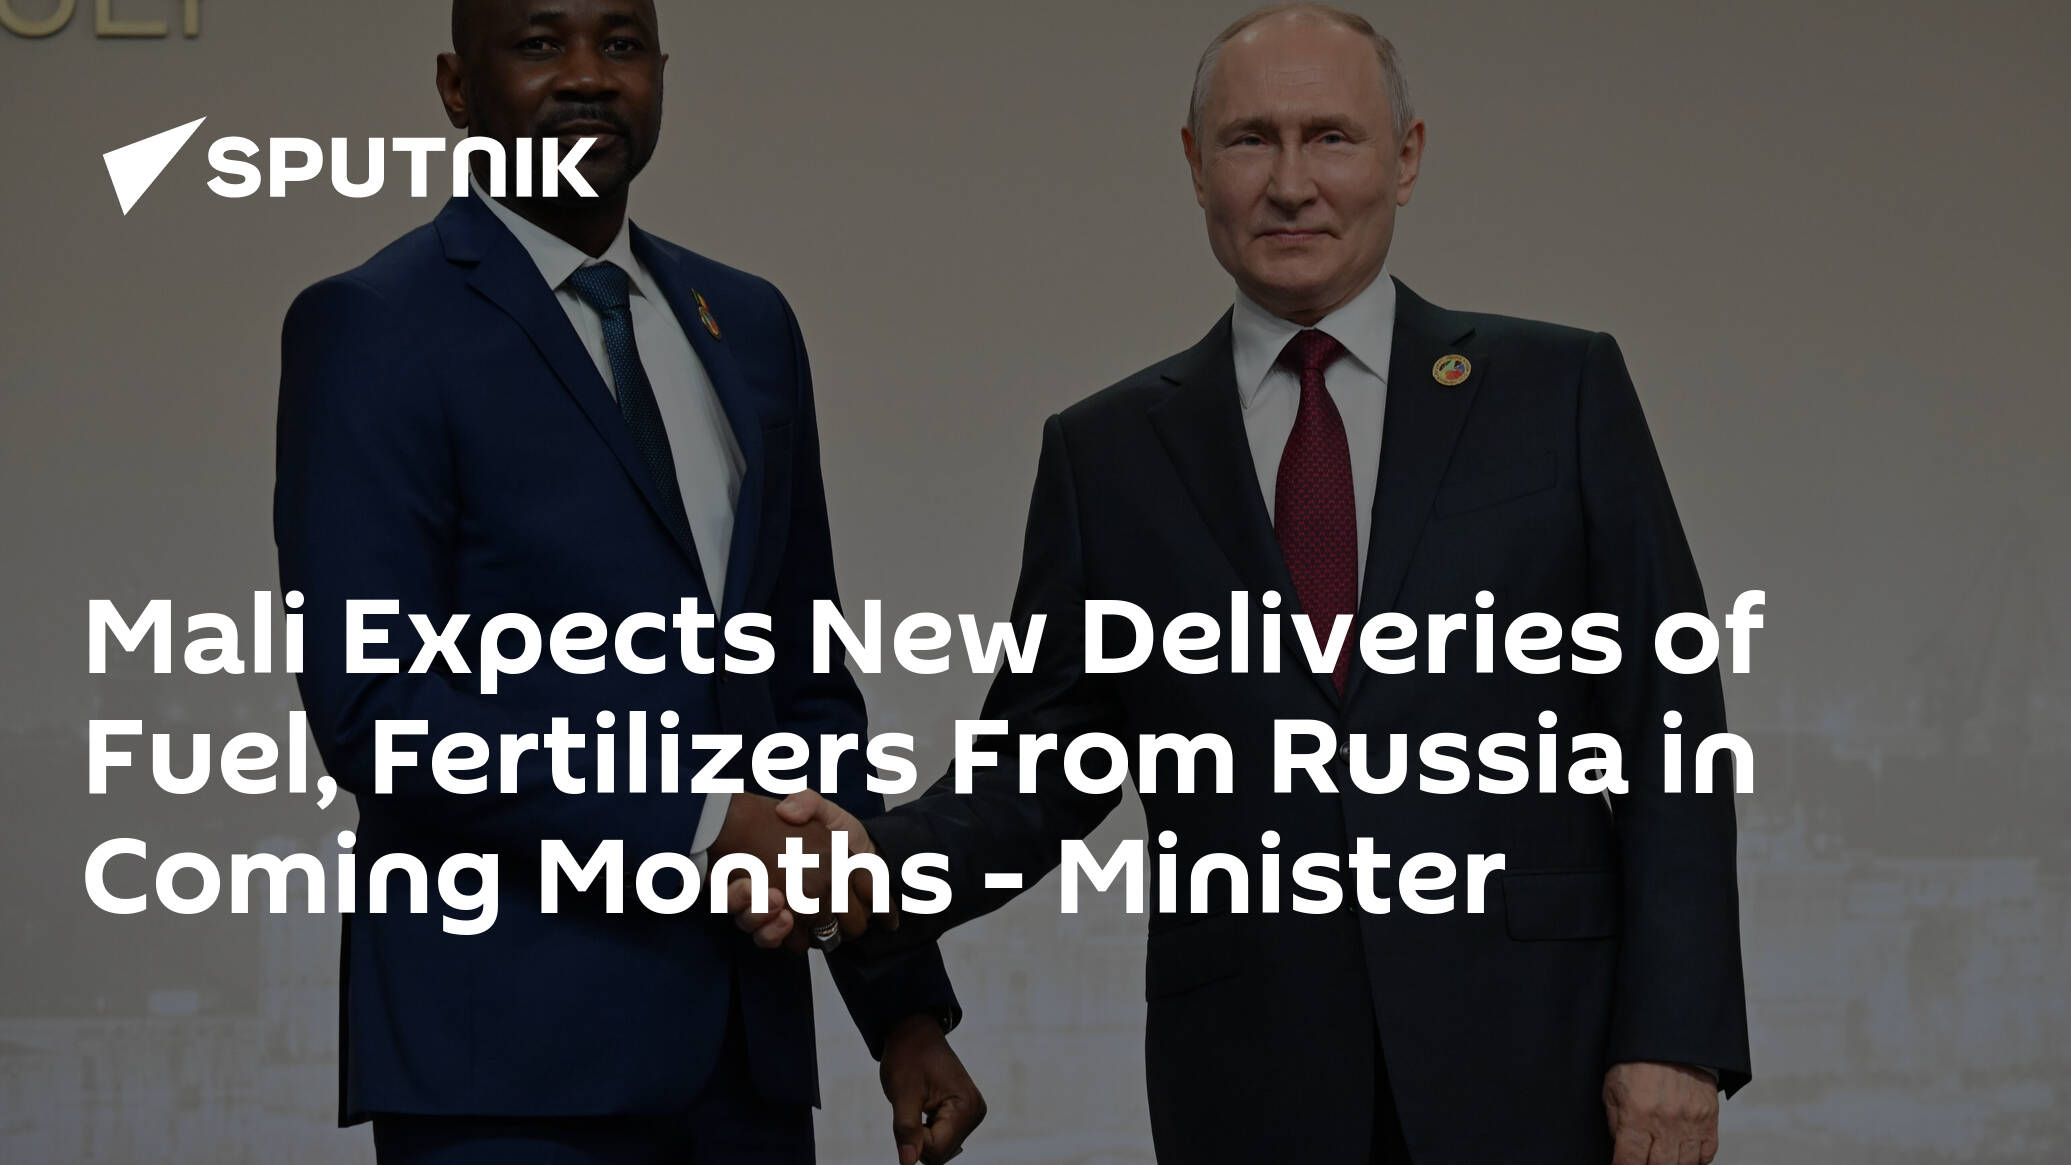 Mali Expects New Deliveries of Fuel, Fertilizers From Russia in Coming Months – Minister